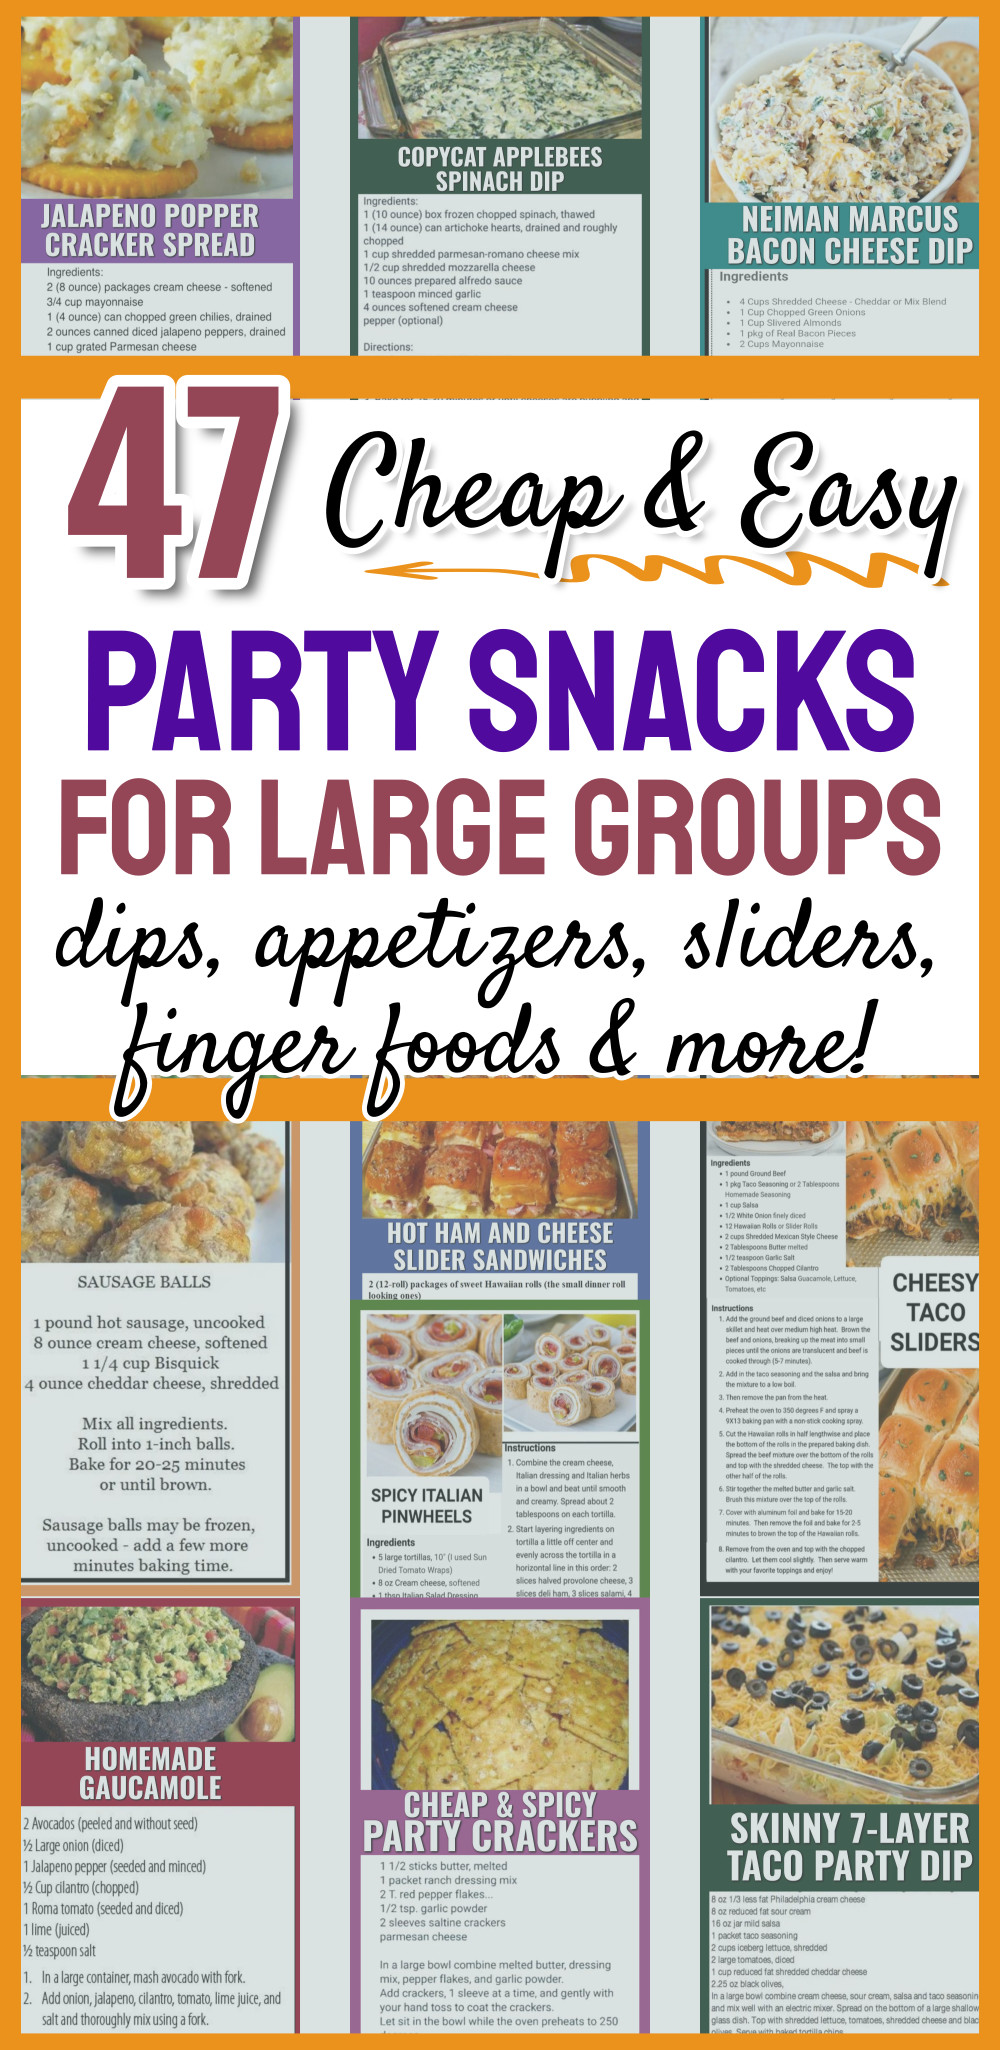 Cheap and Easy Party Snacks For Large Groups dips appetizers sliders finger foods recipes and more